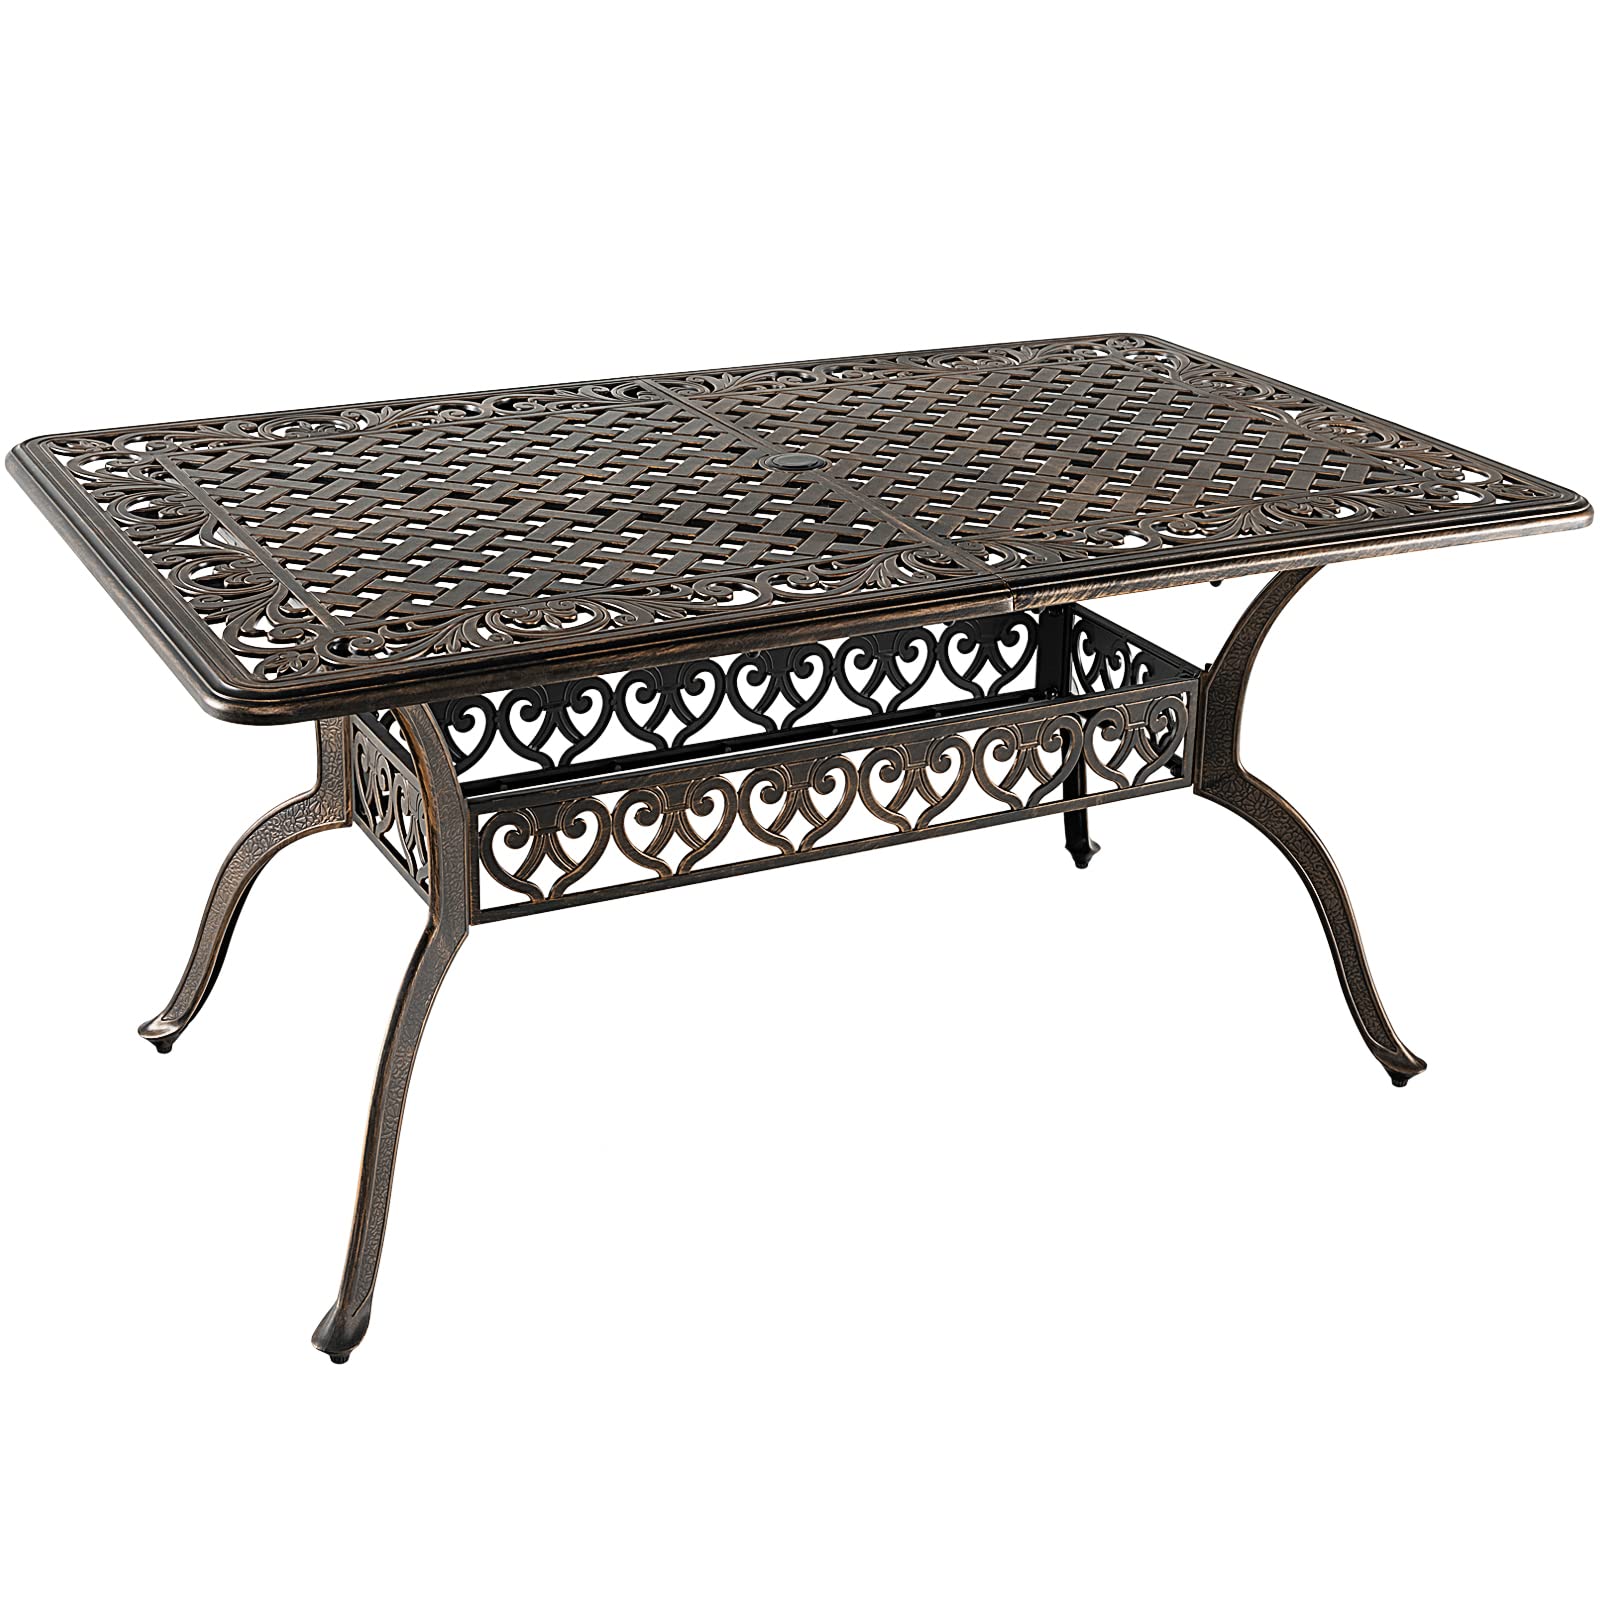 Giantex Patio Dining Table, Cast Aluminum Outdoor Table for 6 or 8 Persons, Heavy-Duty Structure